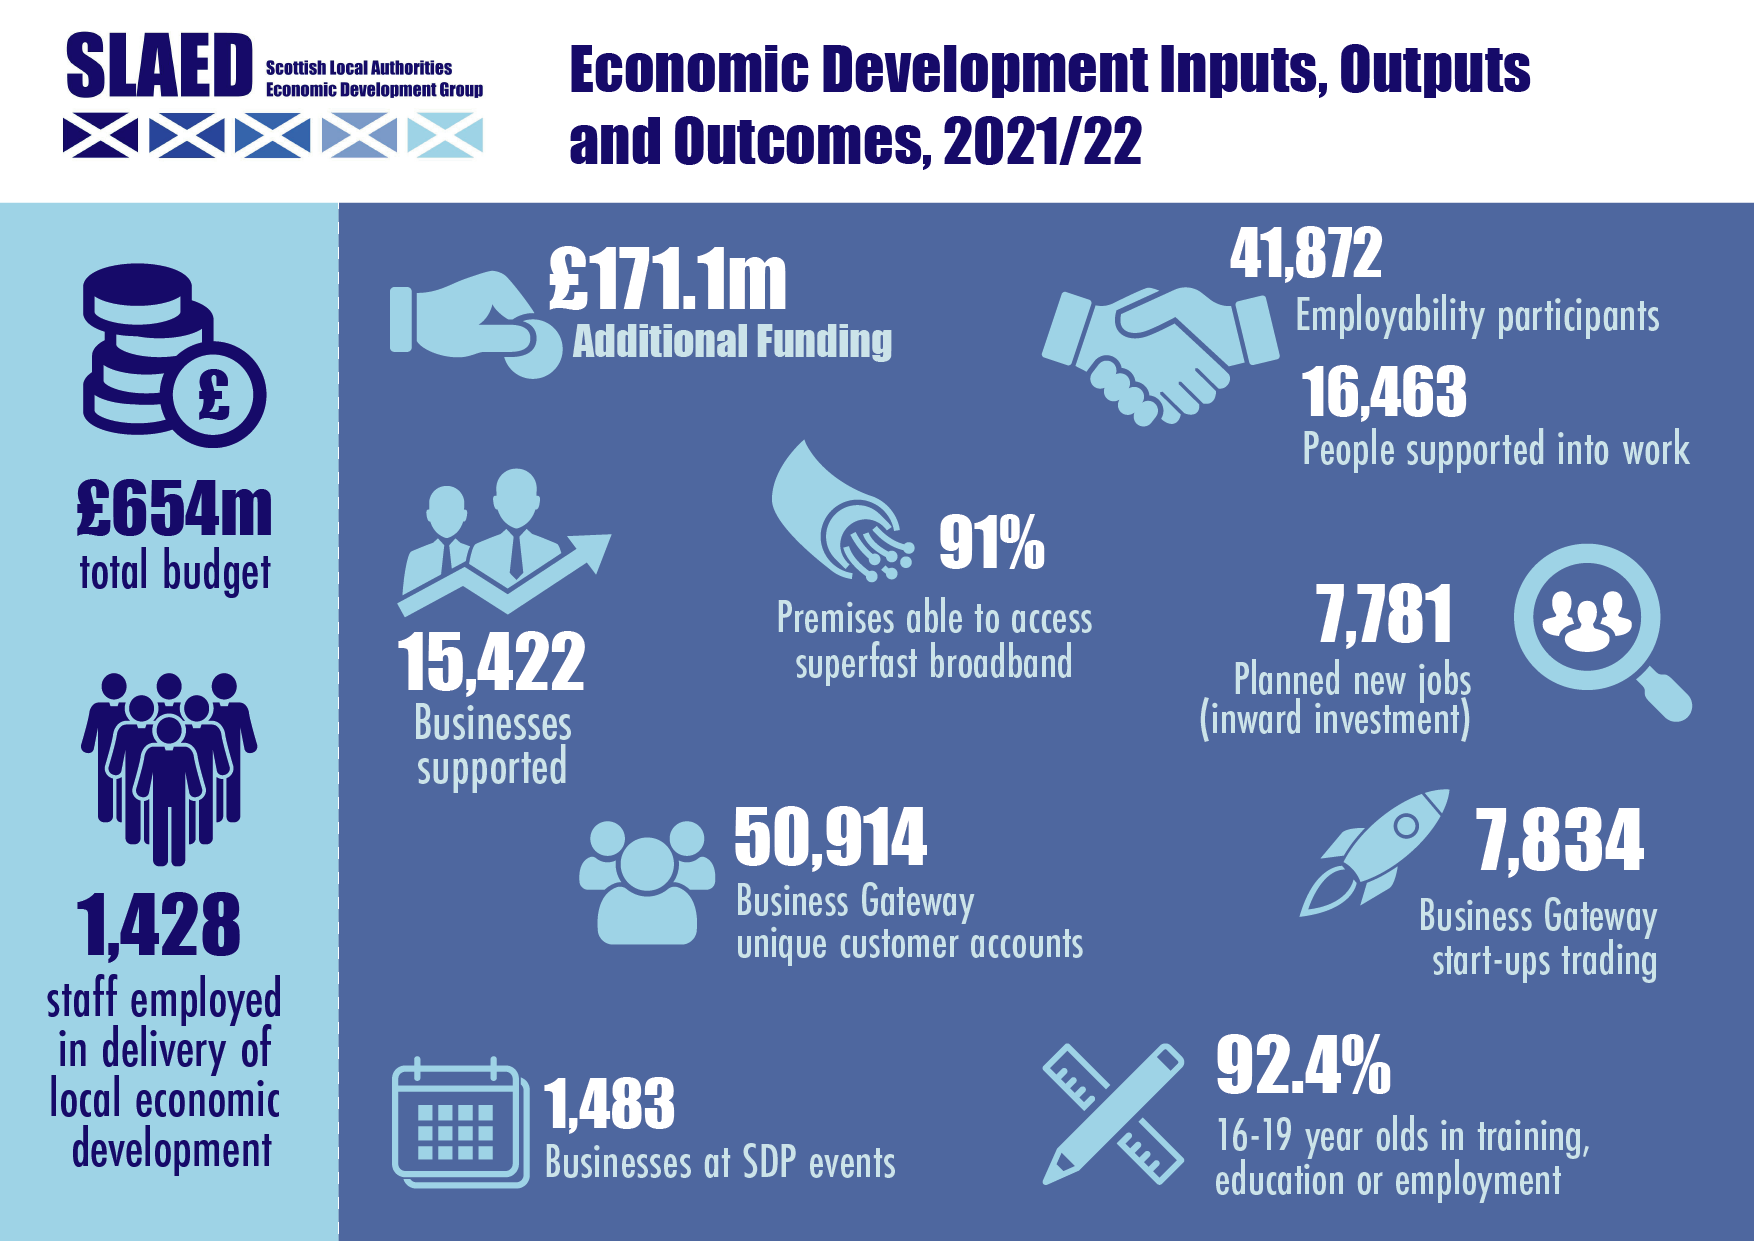 Summary of economic development inputs, outputs and outcomes in 2021-22